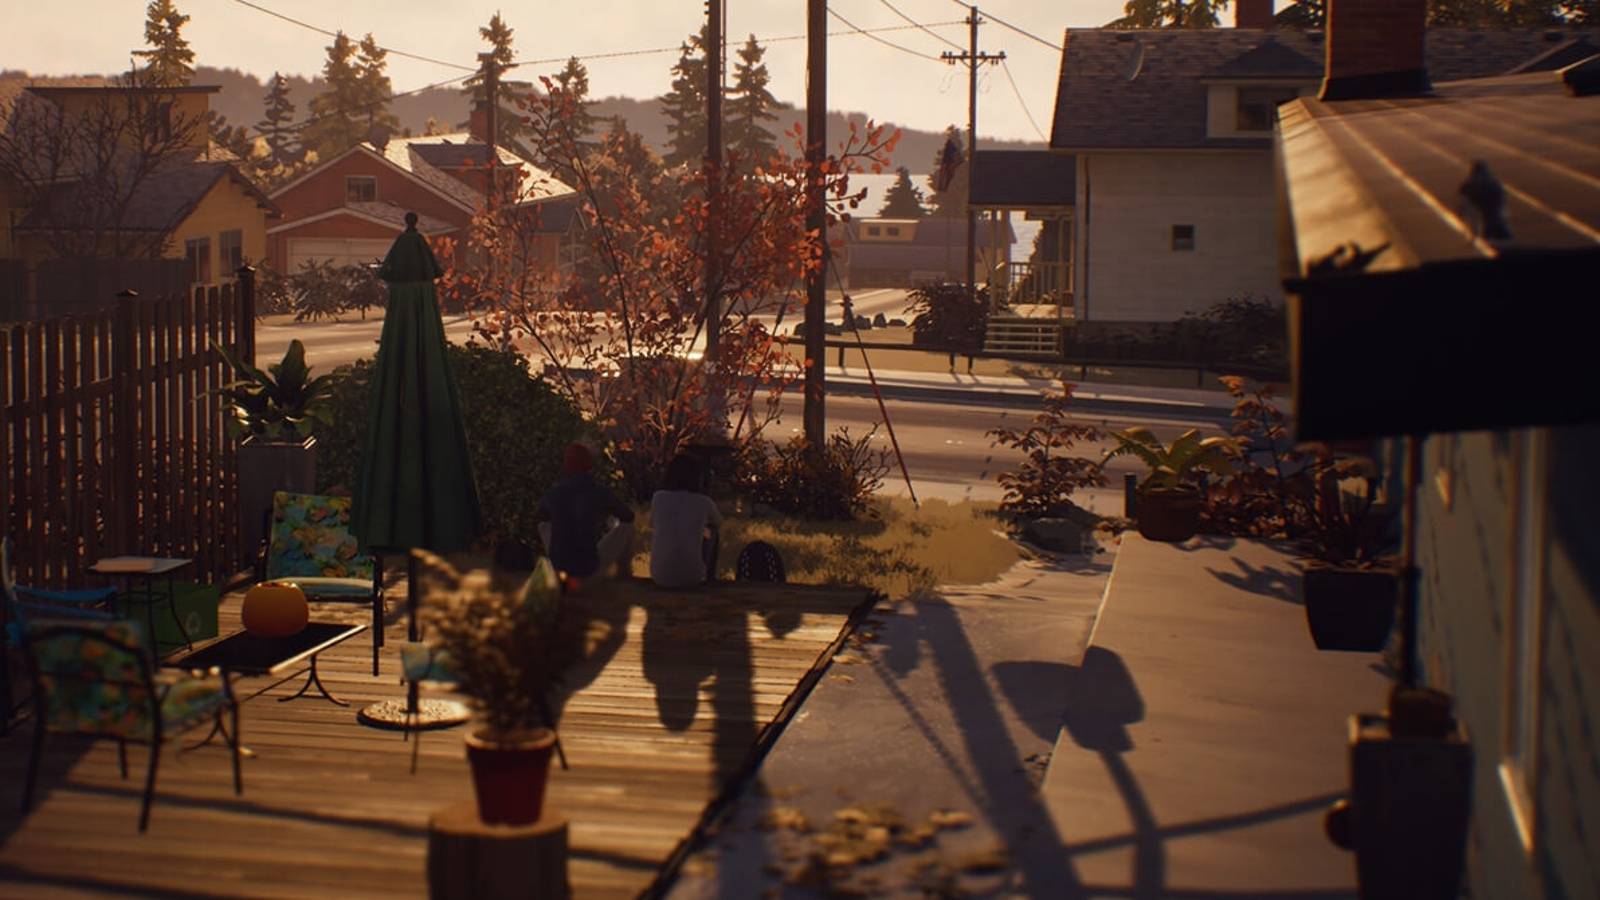 10 games like Life is Strange that are hella good